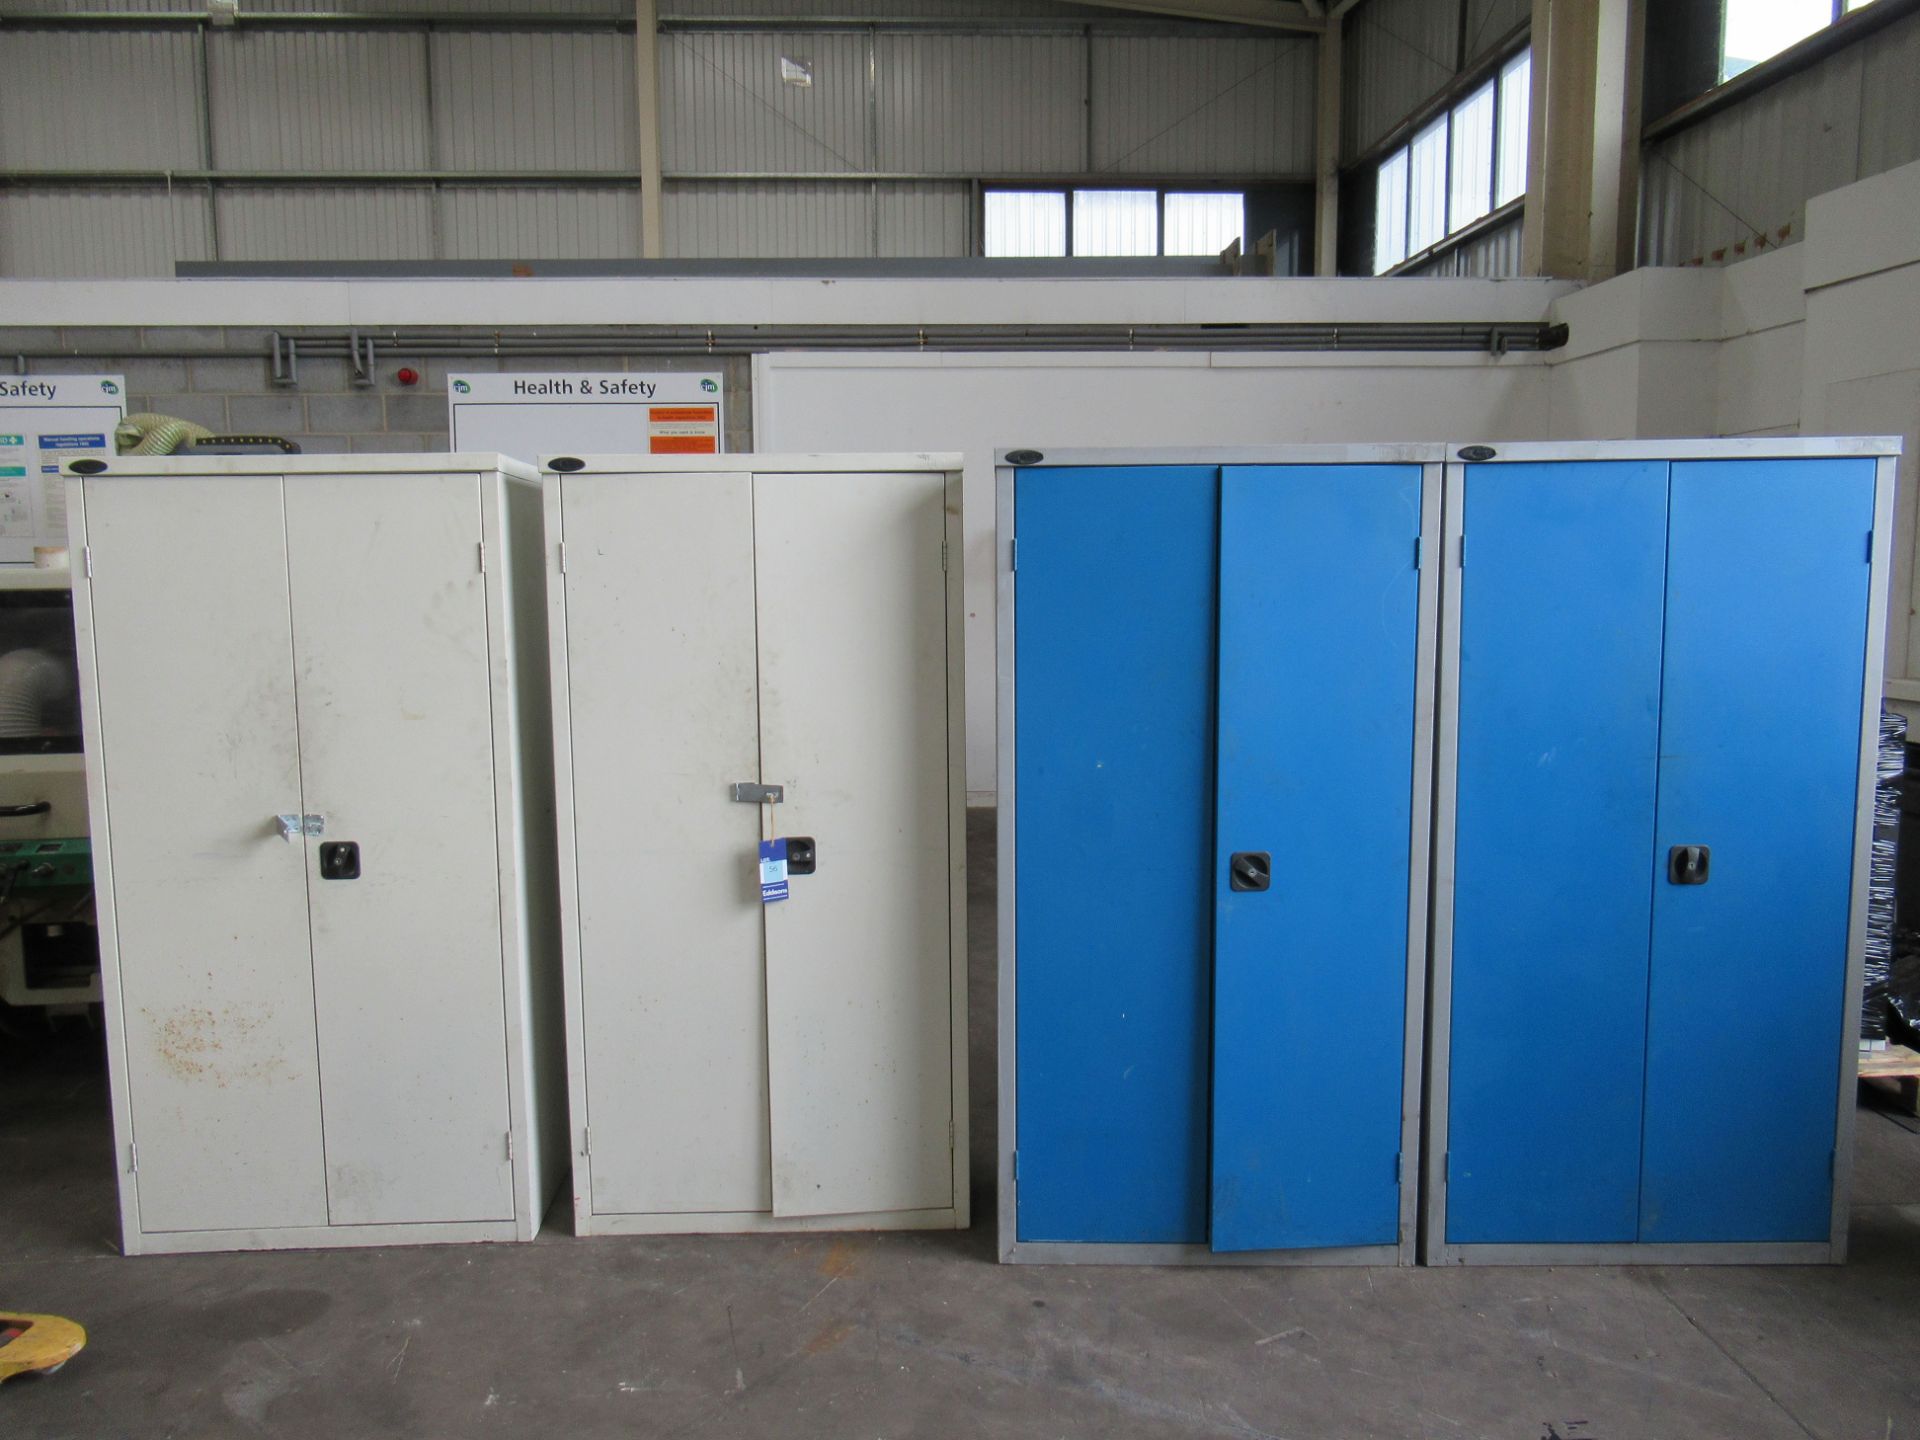 4x Metal Storage Cabinets & Contents.